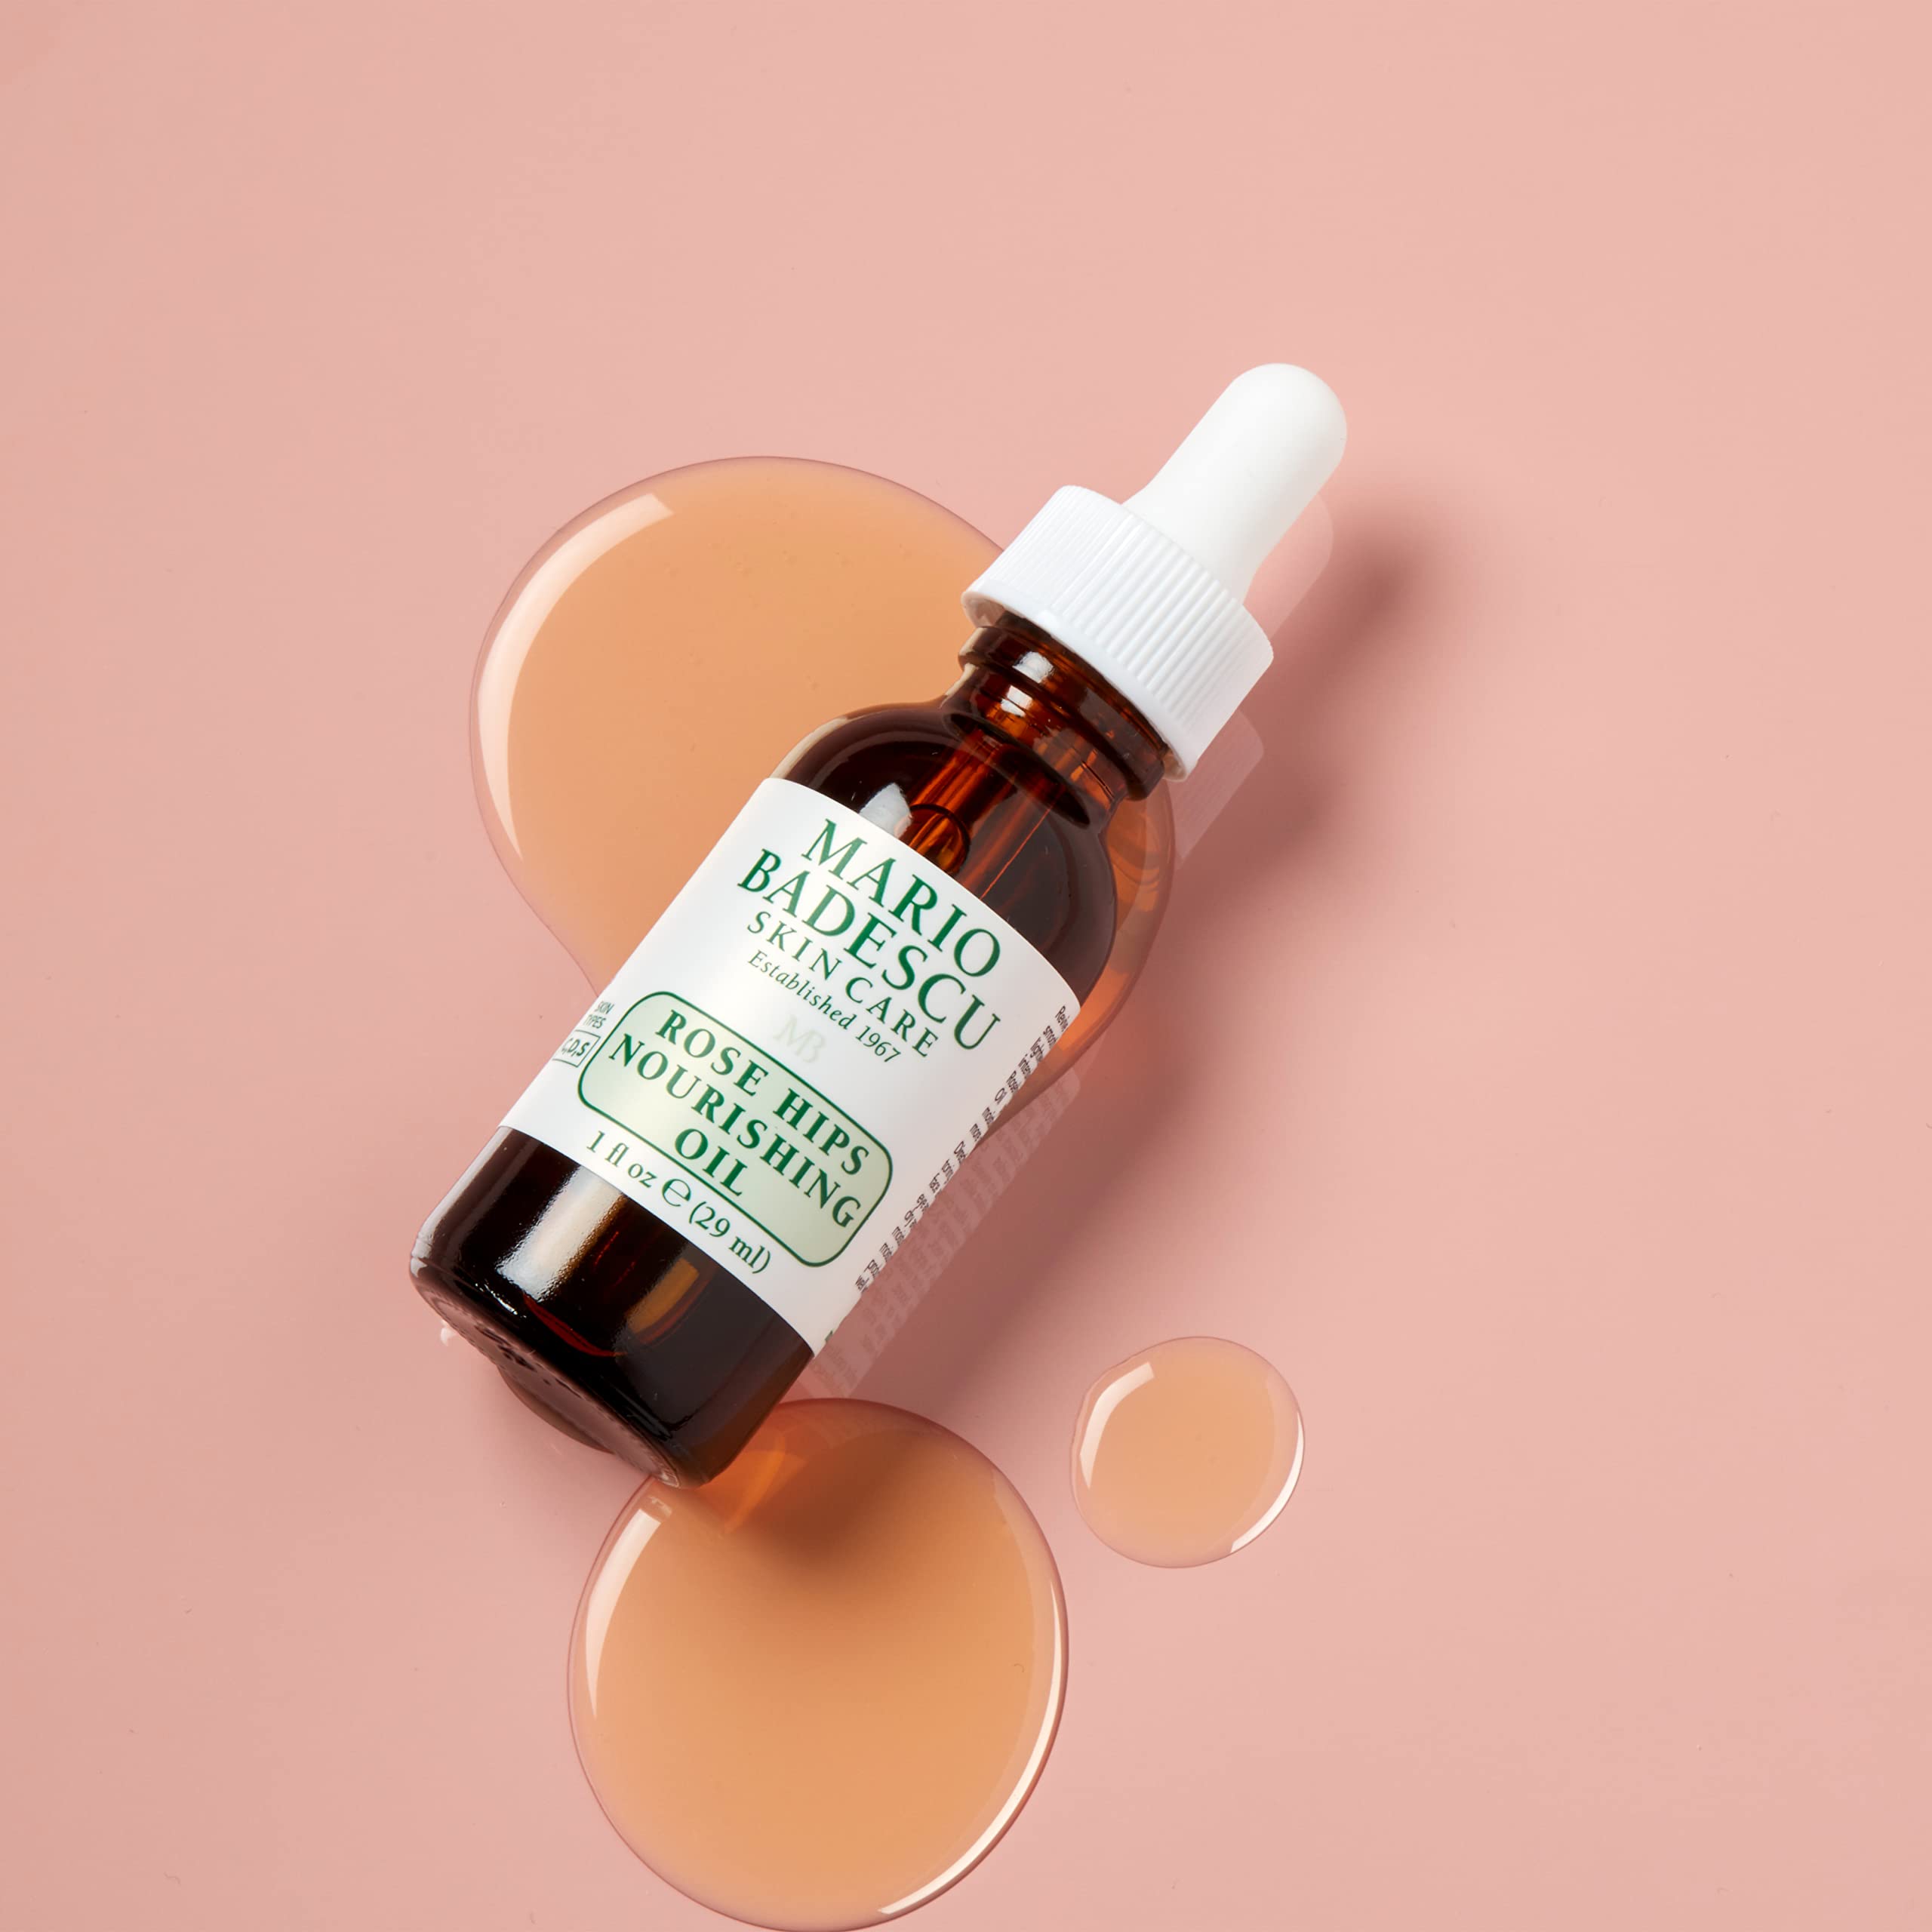 Mario Badescu Rose Hips Nourishing Oil for Combination, Dry and Sensitive Skin | Facial Oil that Moisturizes & Smoothes | Formulated with Rosehip Extract & Castor Oil| 1 FL OZ (Pack of 1)